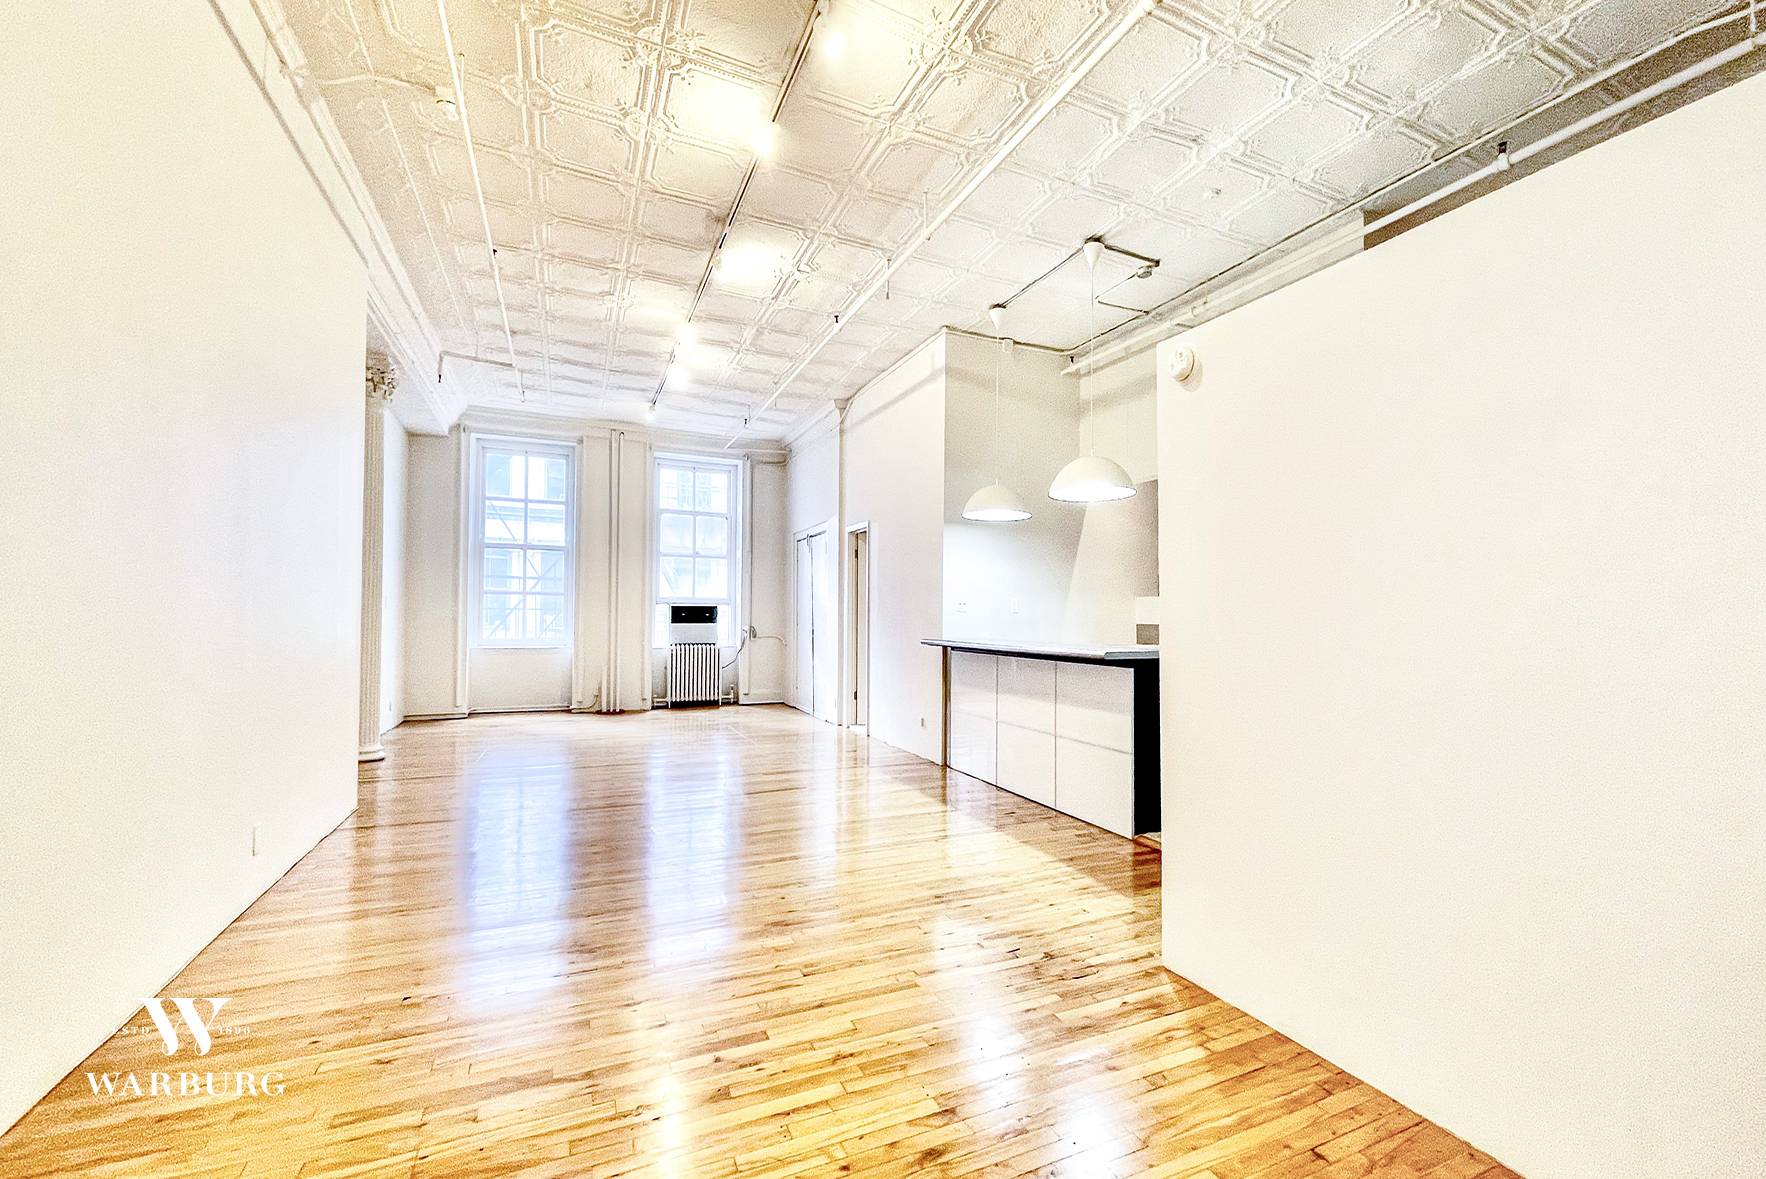 South facing apartment with over sized windows in a Cast Iron Tribeca Rental Building.